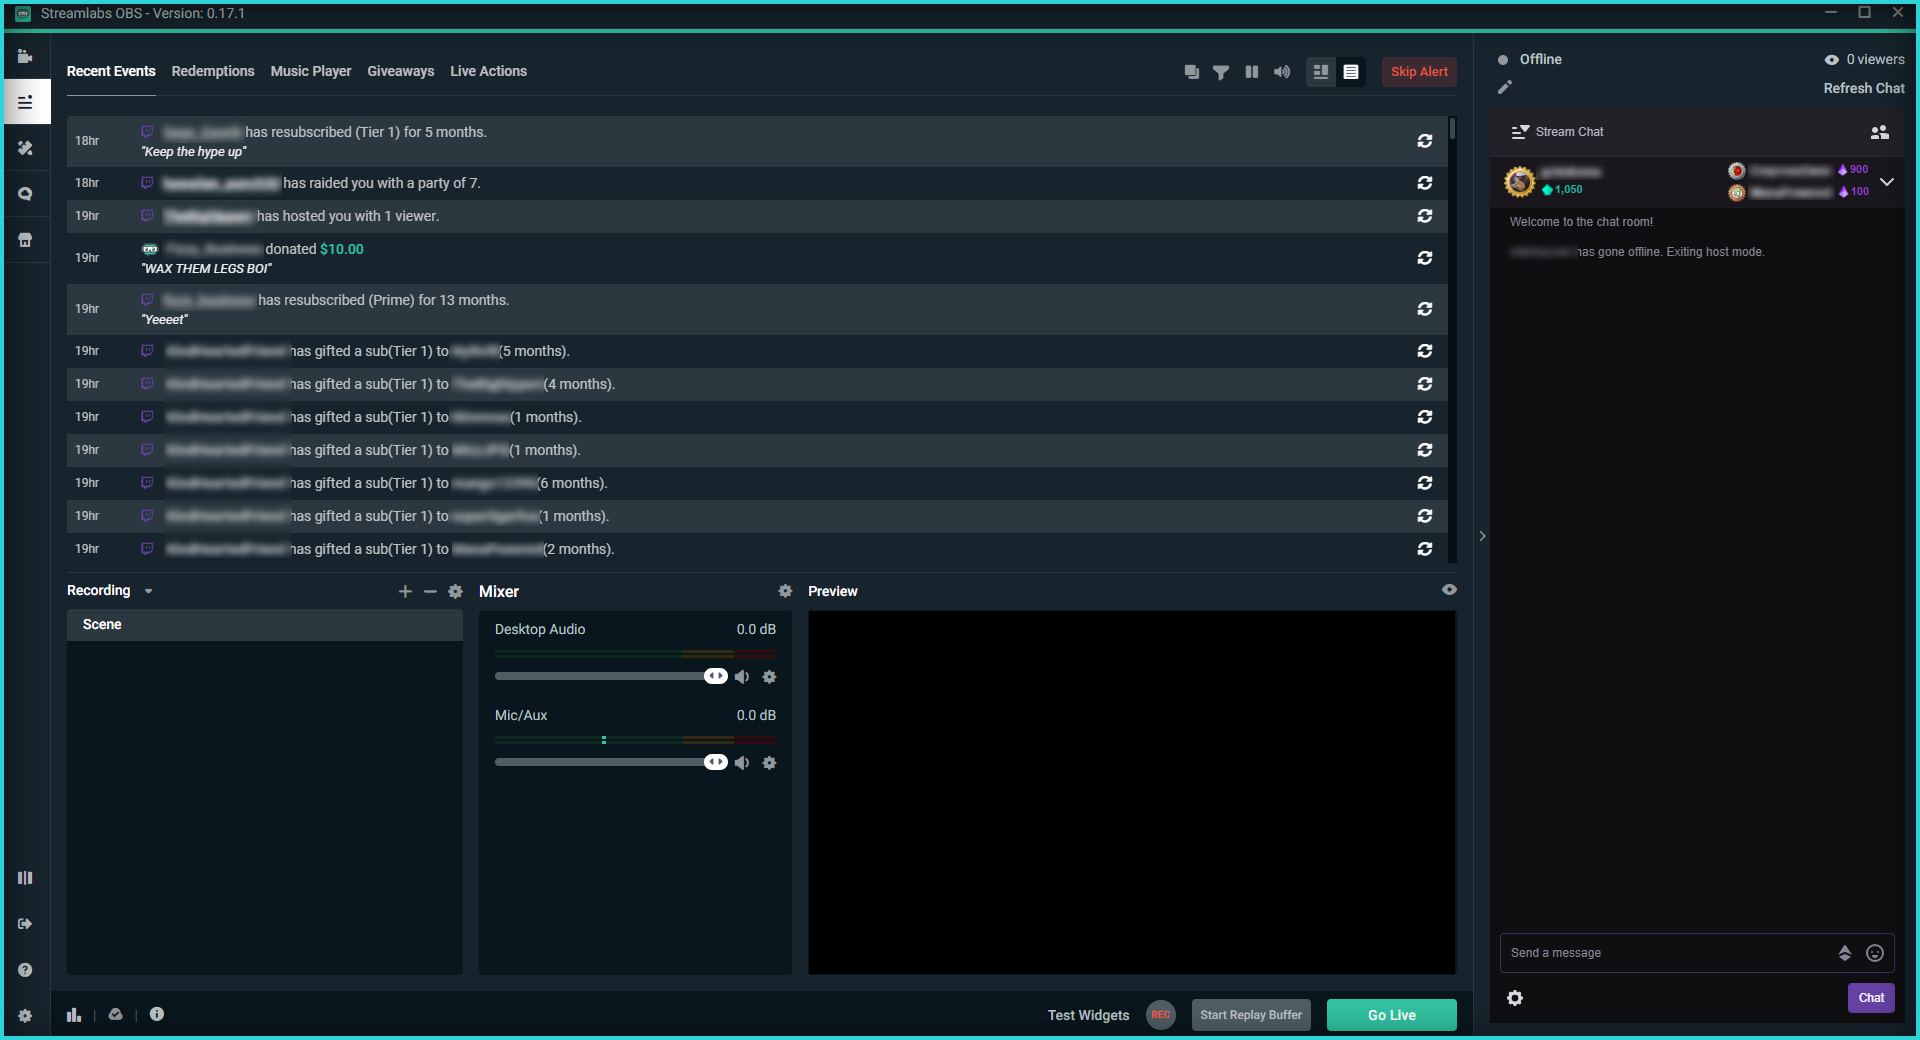 latest version of streamlabs obs